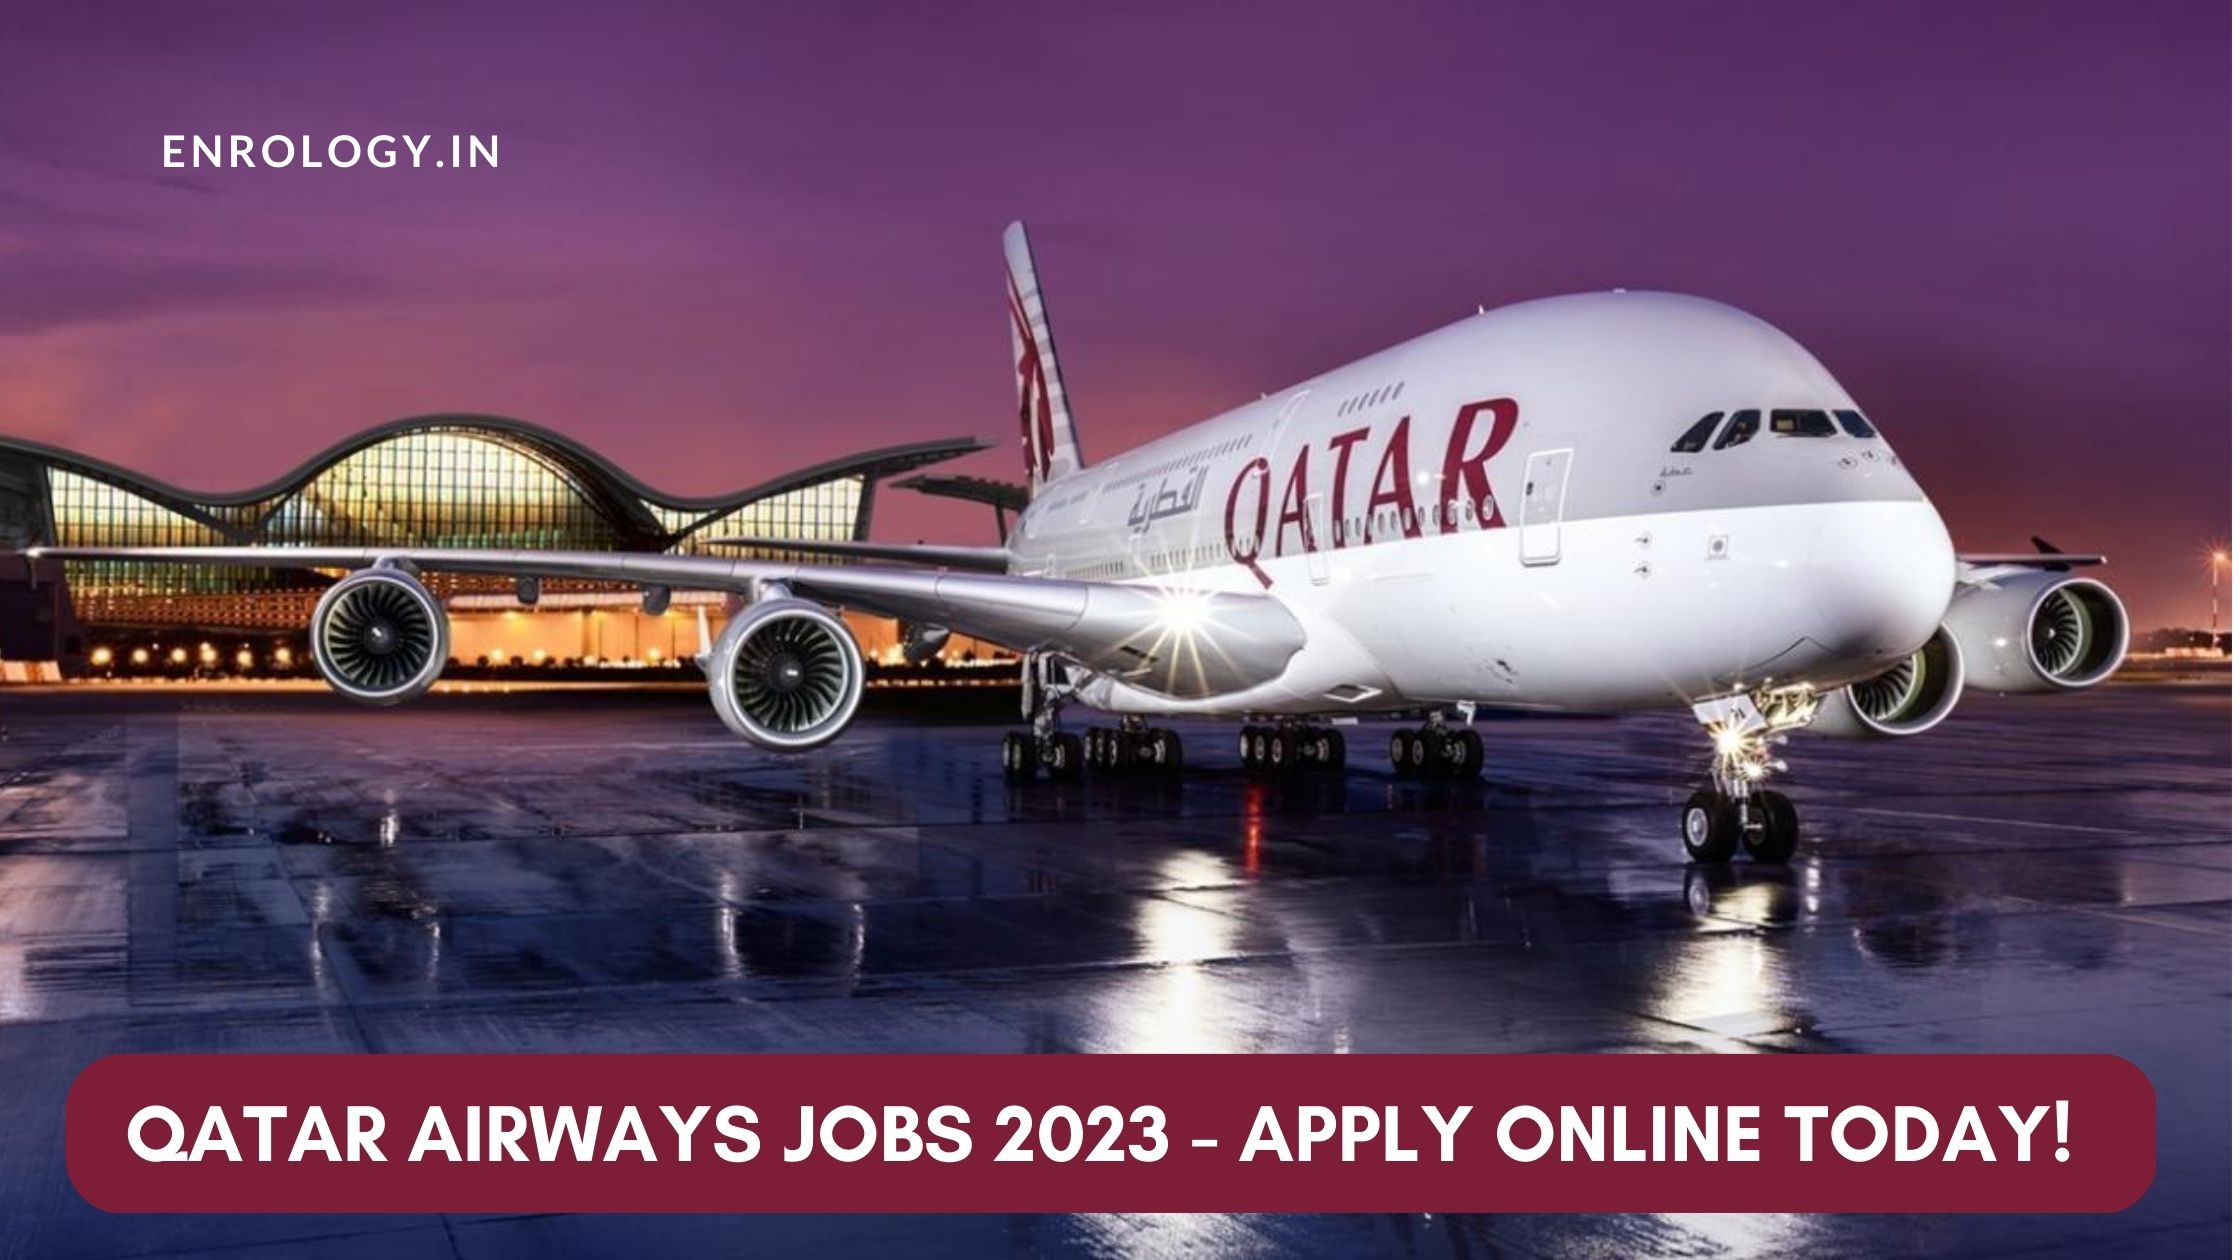 Qatar Airways Jobs 2023 Exciting Job Opportunities Await Apply Today 